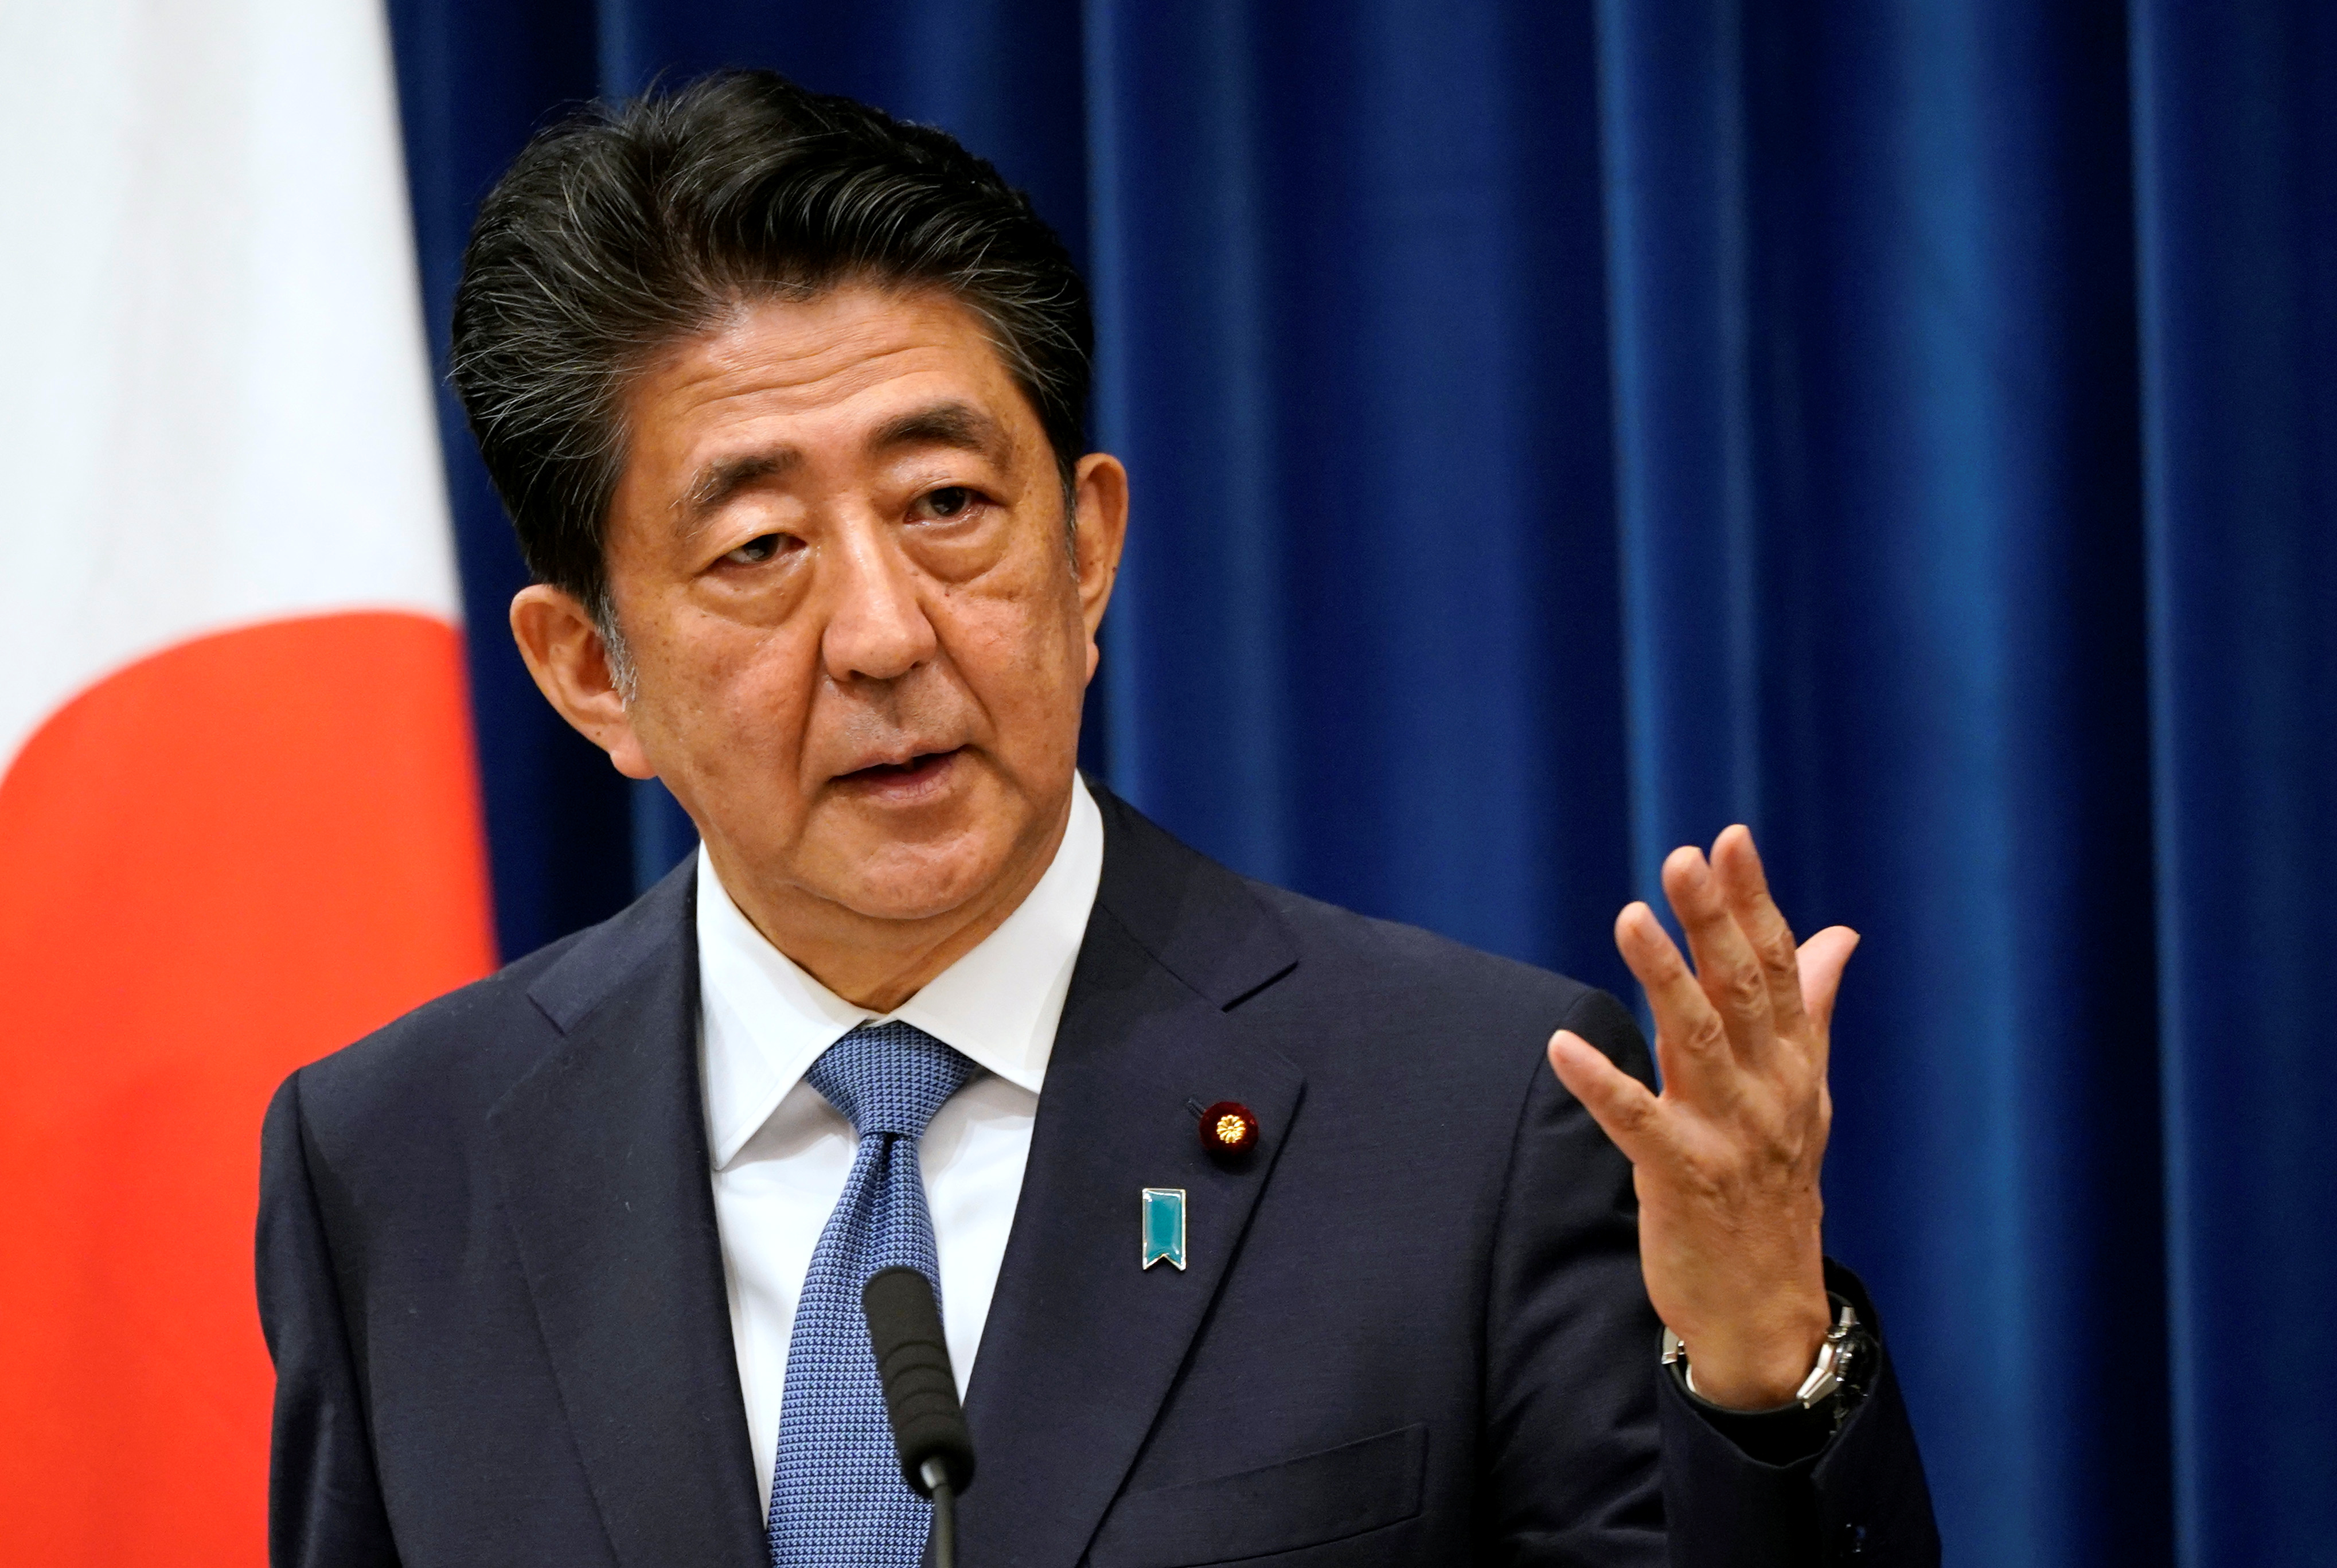 What was the significance of Shinzo Abe to the Japanese people?